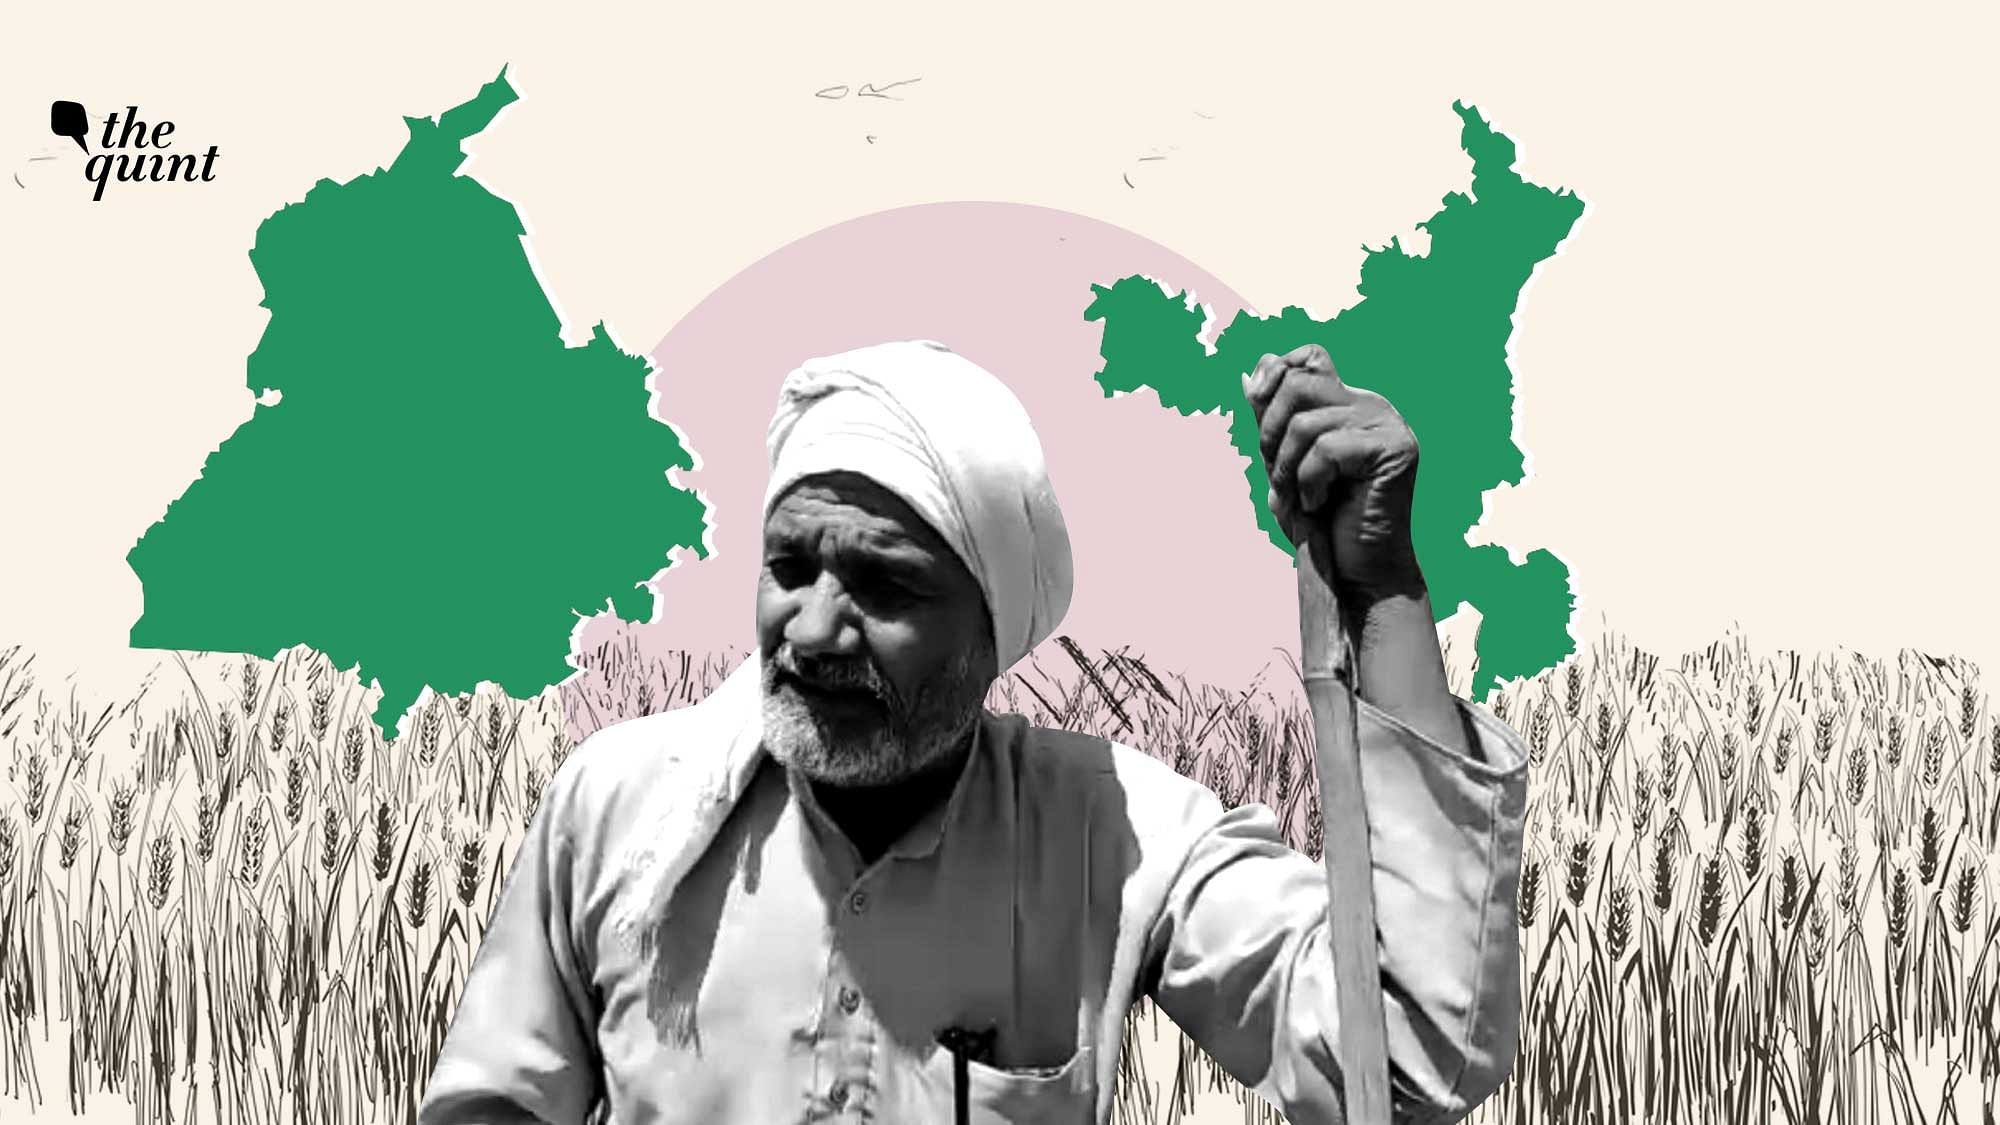 Wheat farmers in Haryana and Punjab stare at a massive crisis due to labour shortage following nationwide lockdown.